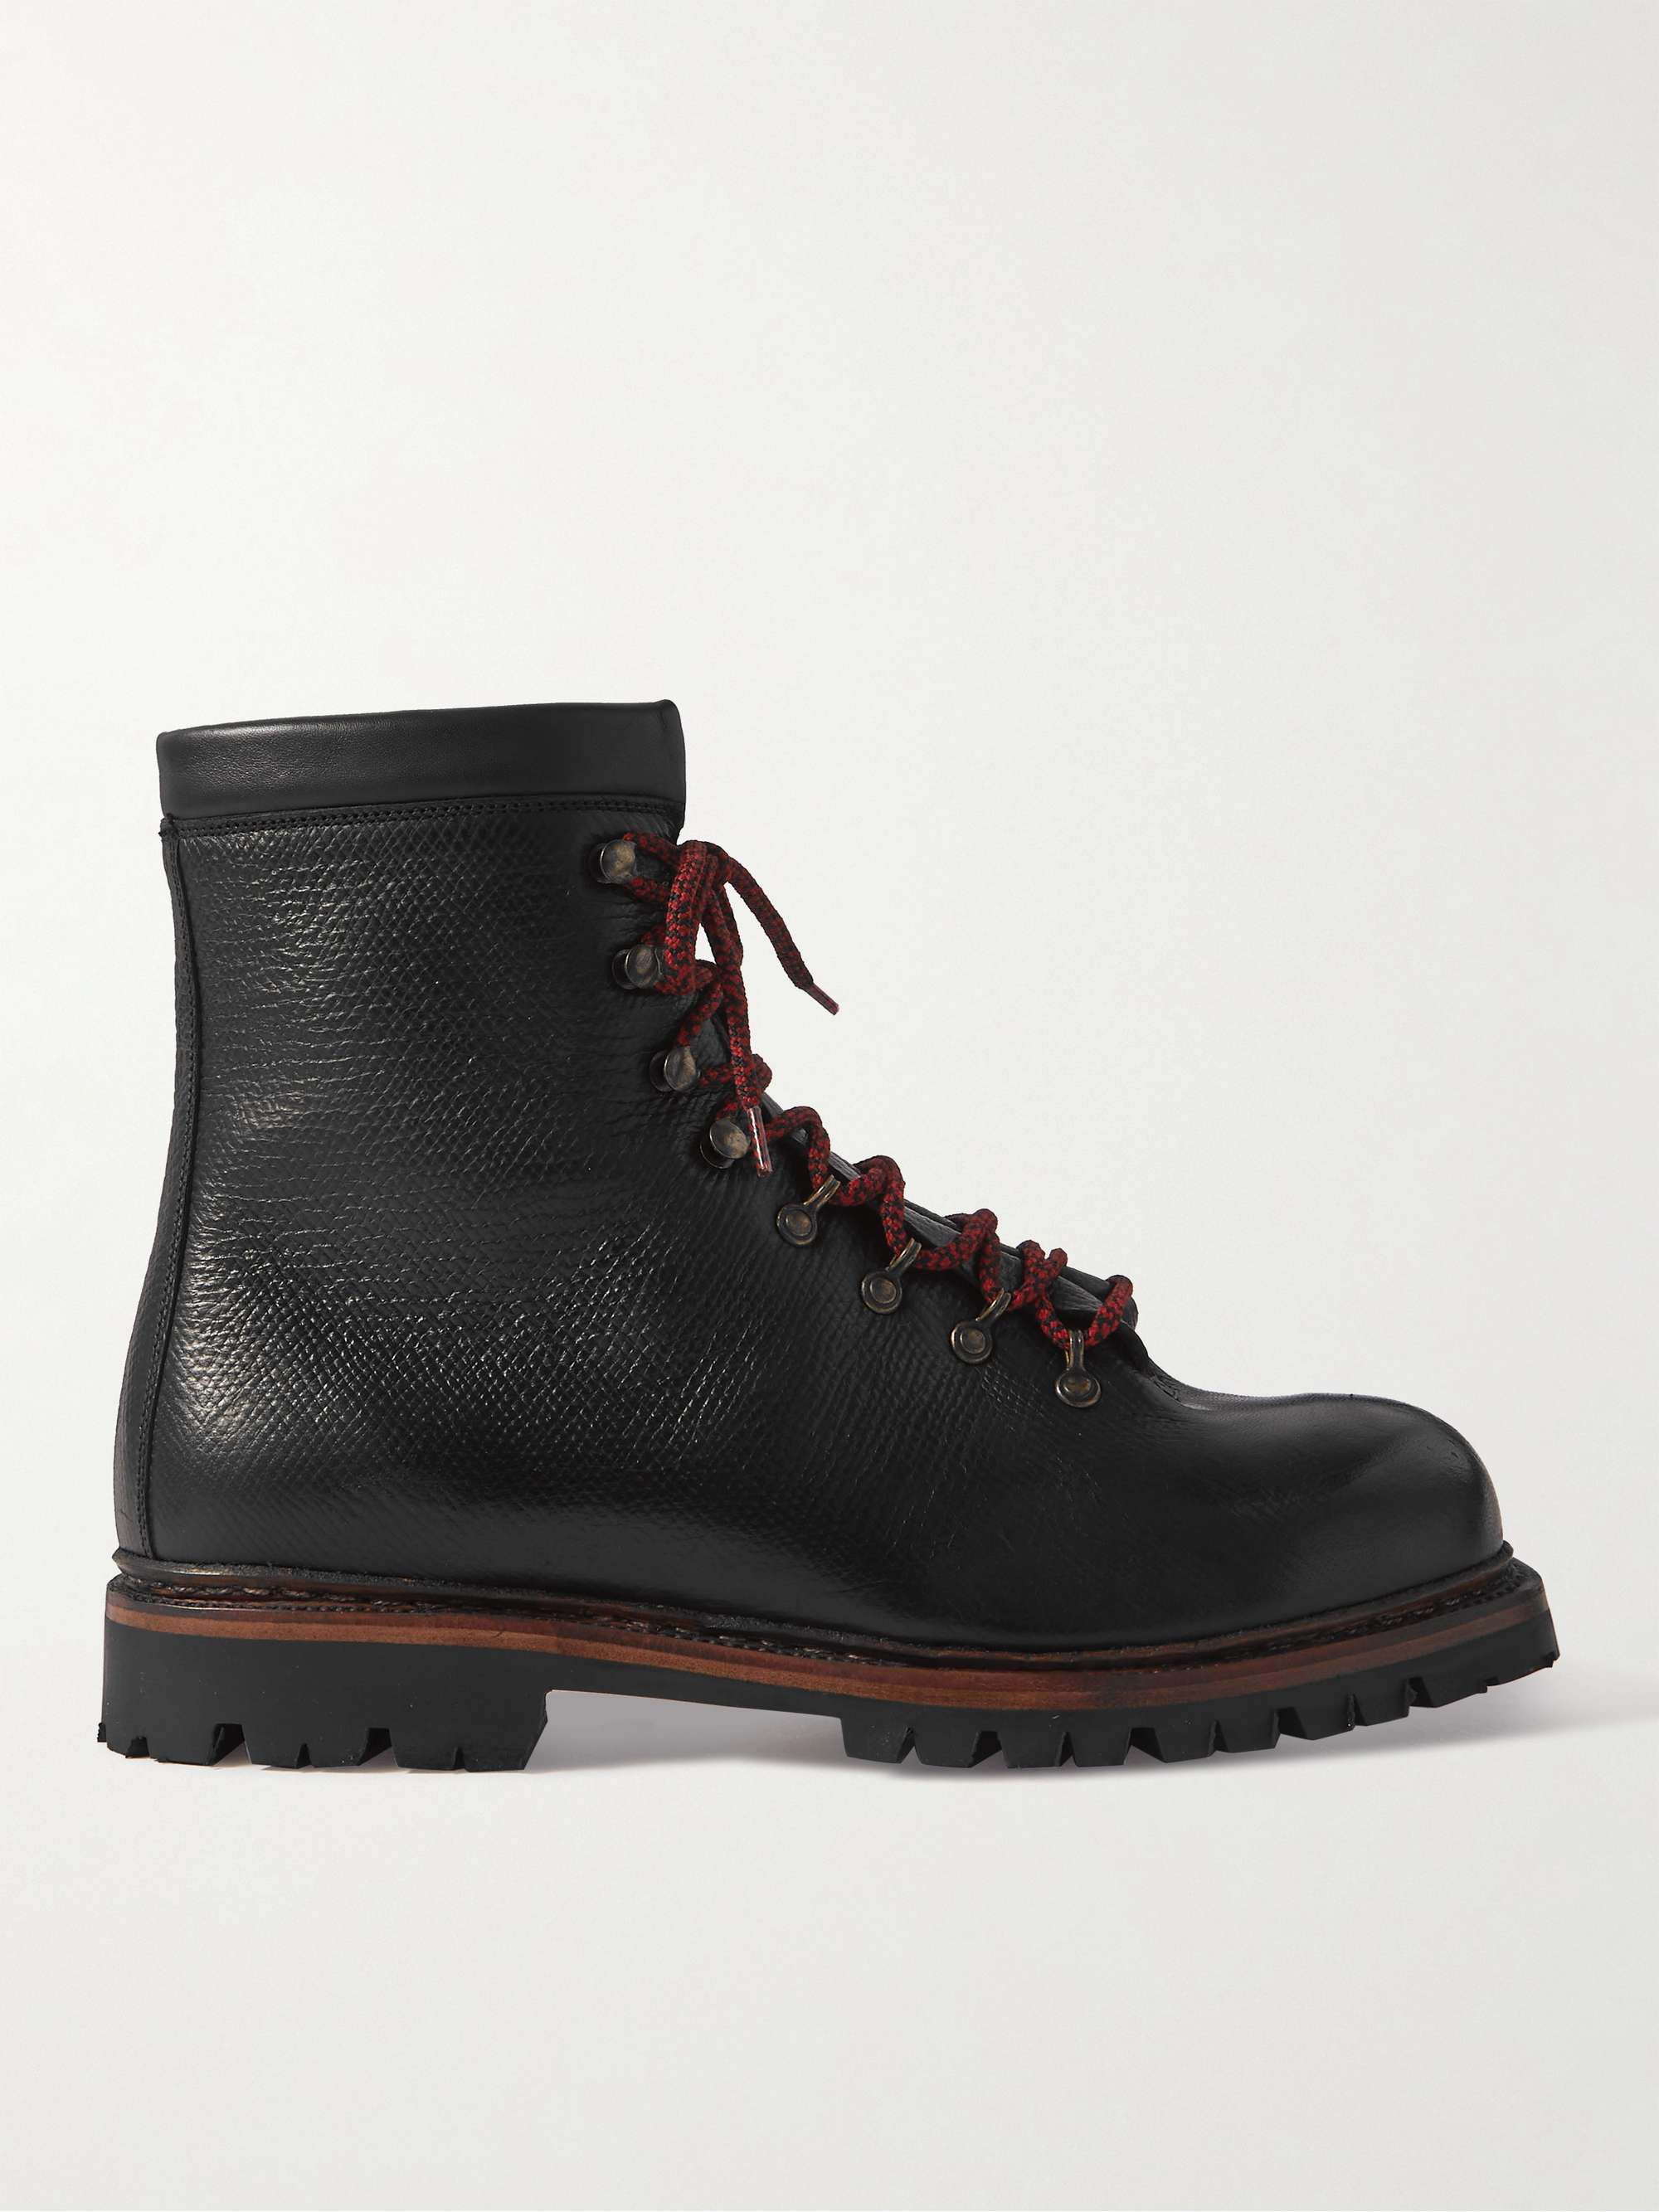 GEORGE CLEVERLEY Full-Grain Leather Boots